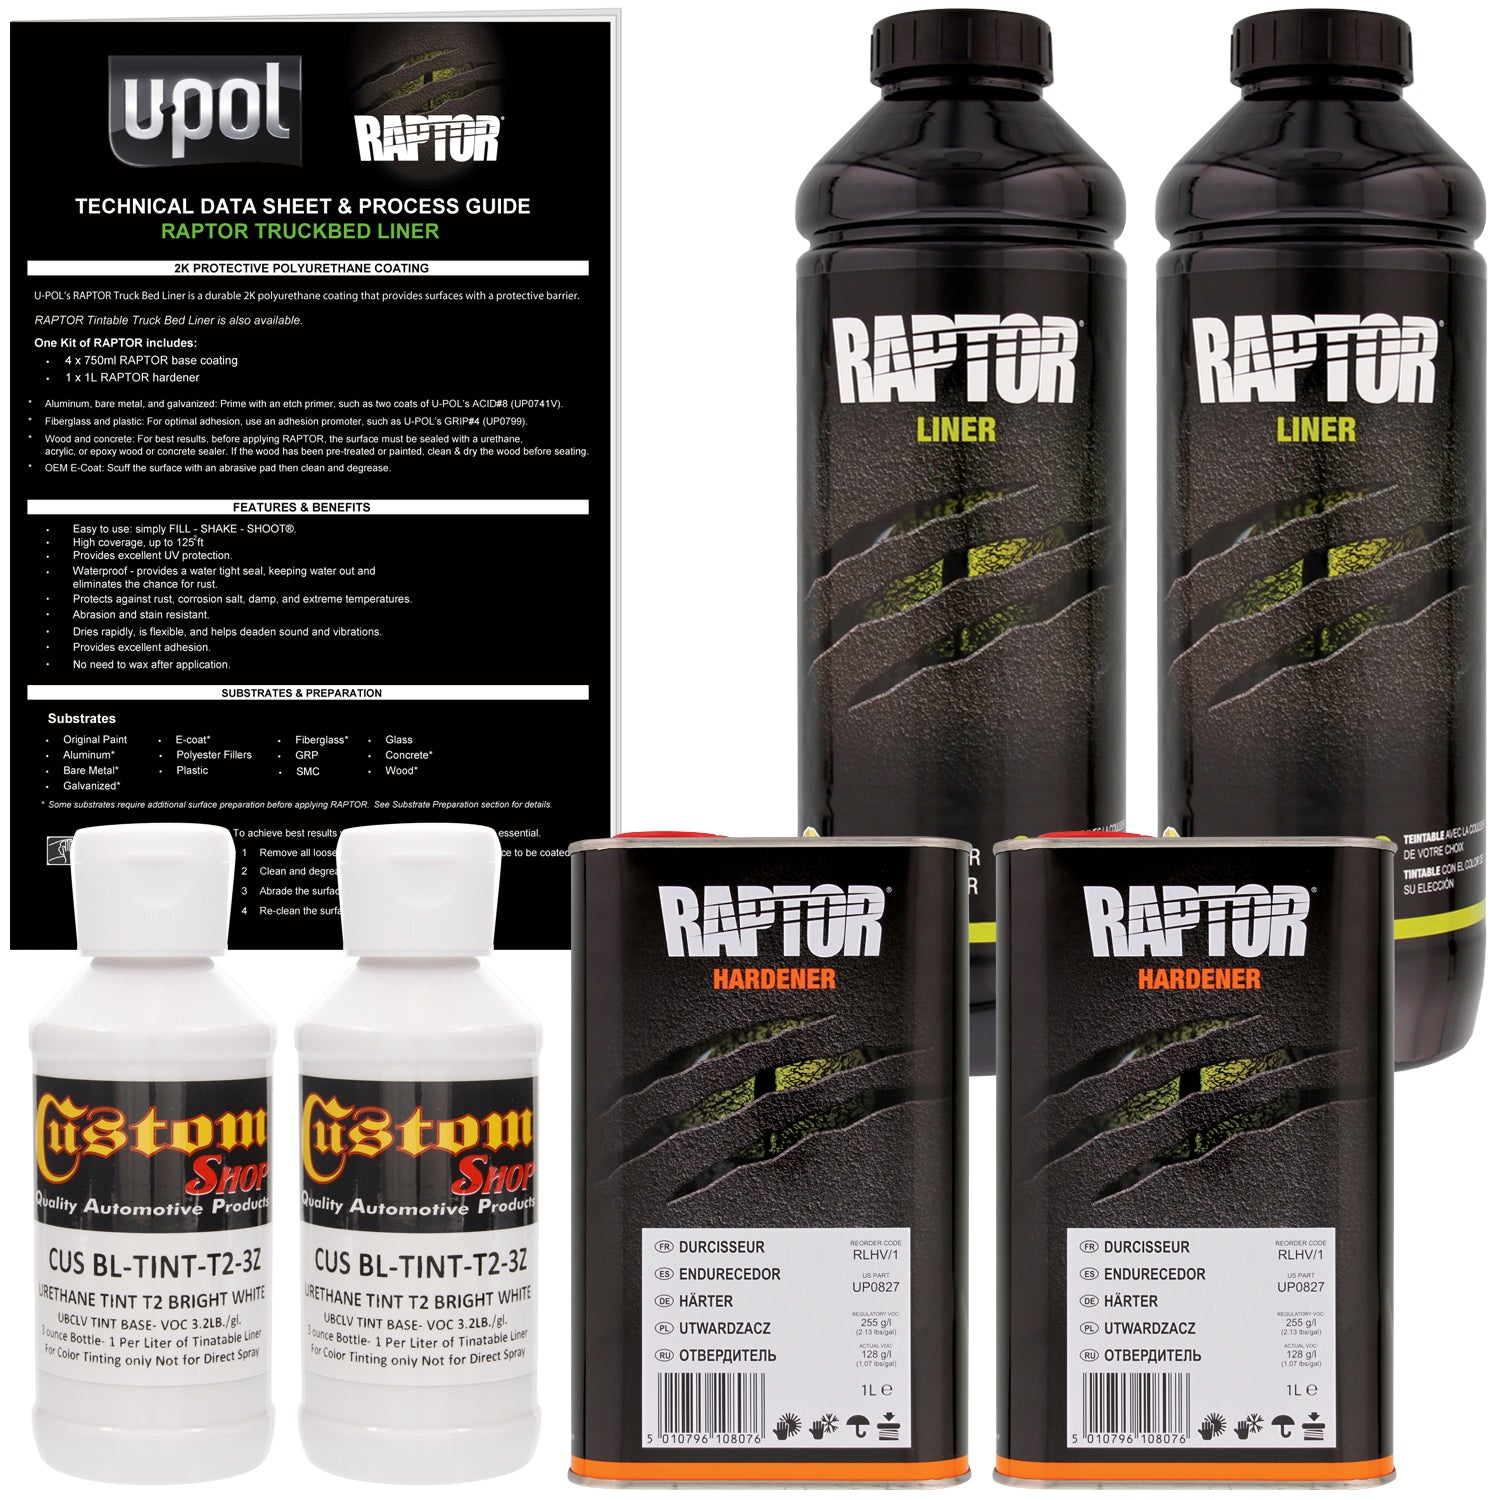 Black - U-POL Urethane Spray-On Truck Bed Liner Kit with included Spray Gun, 4 Liters